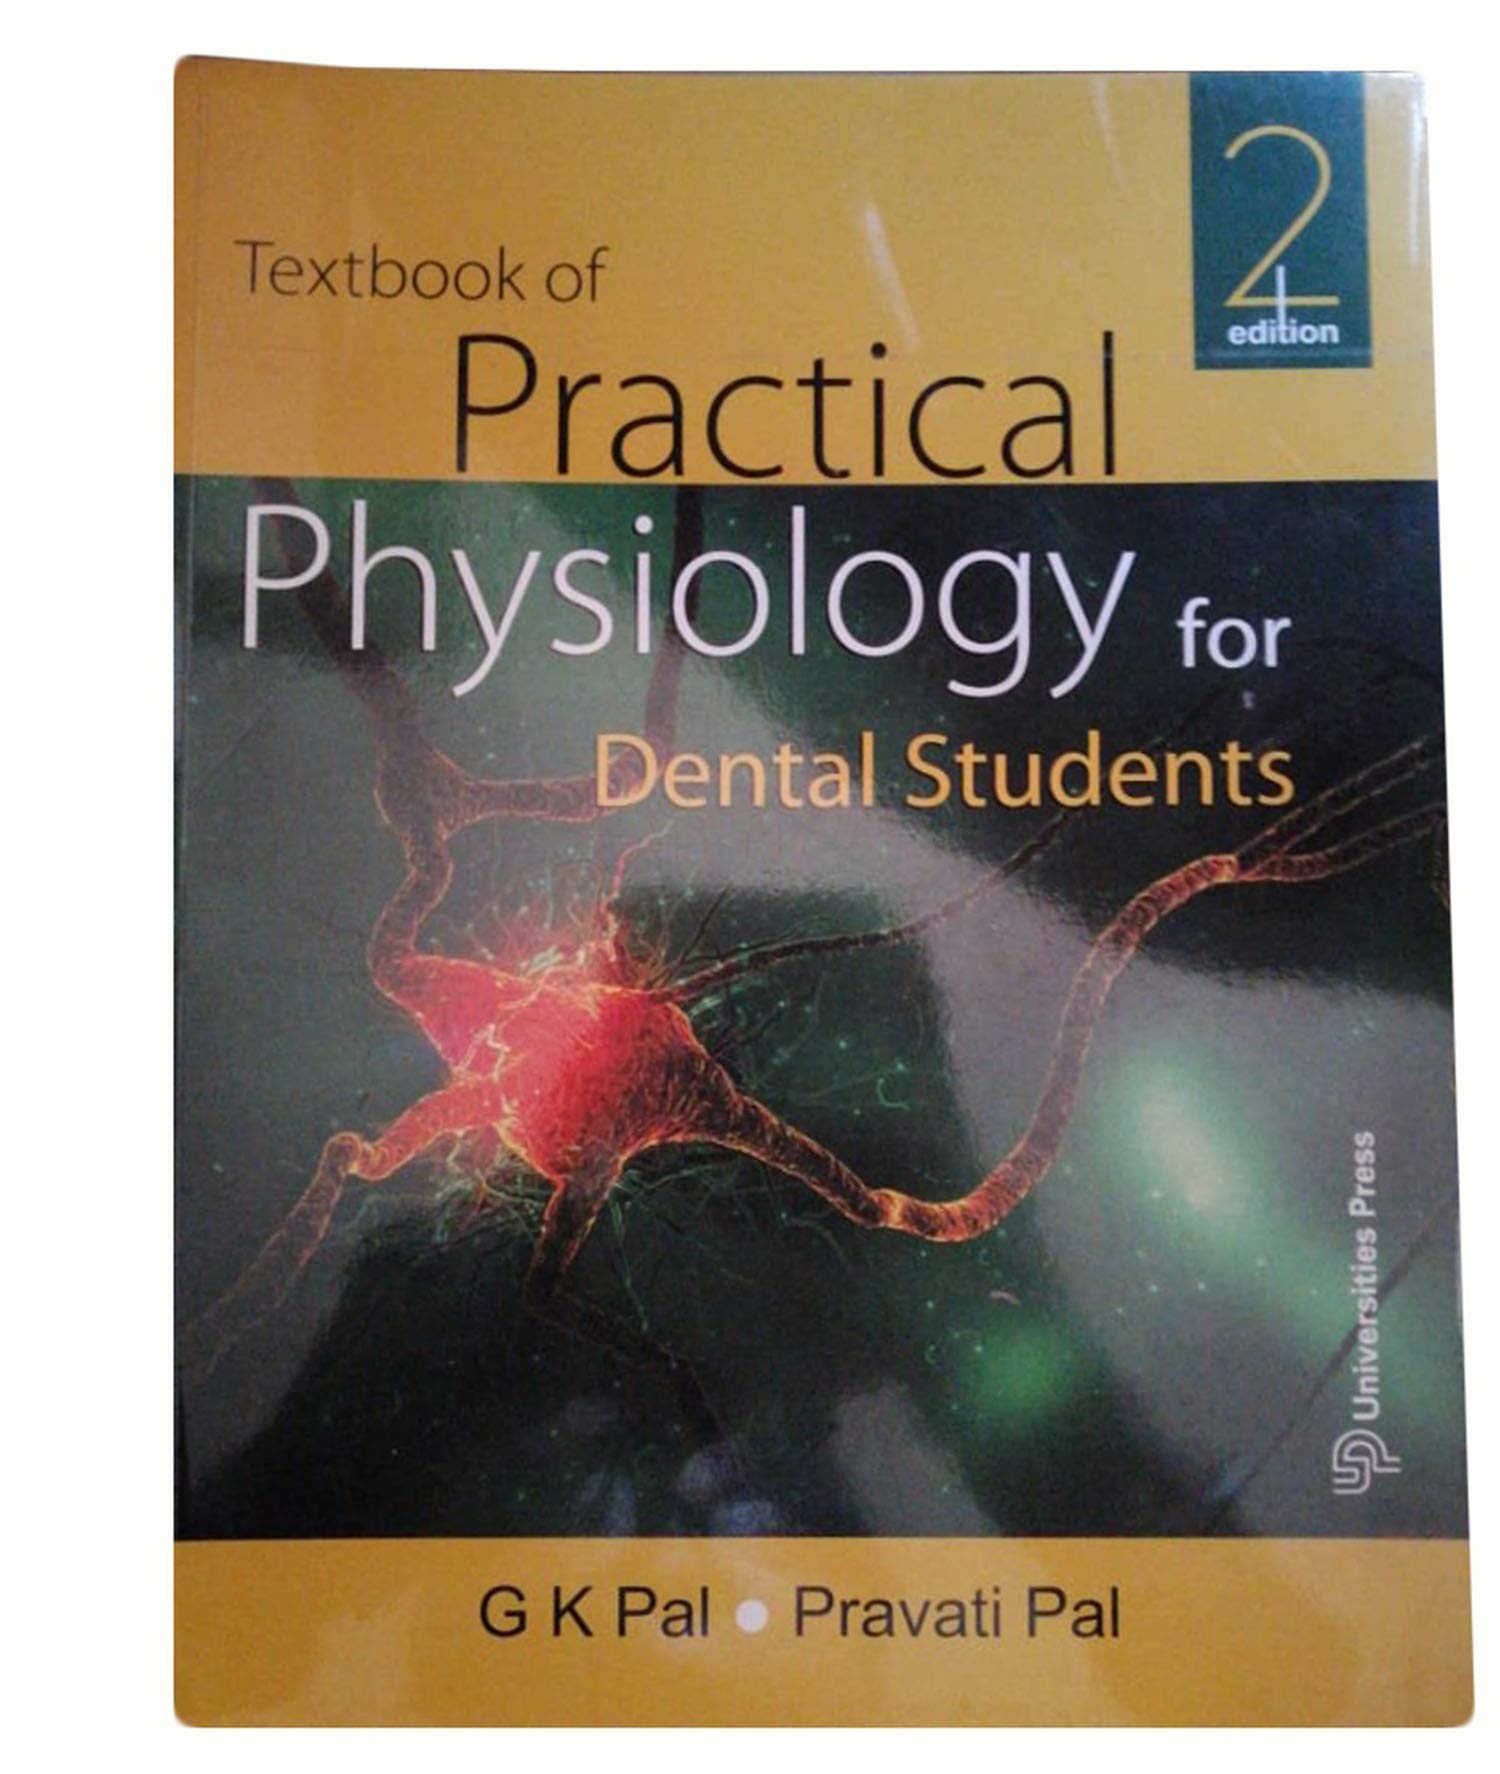 textbook-of-practical-physiology-for-dental-student